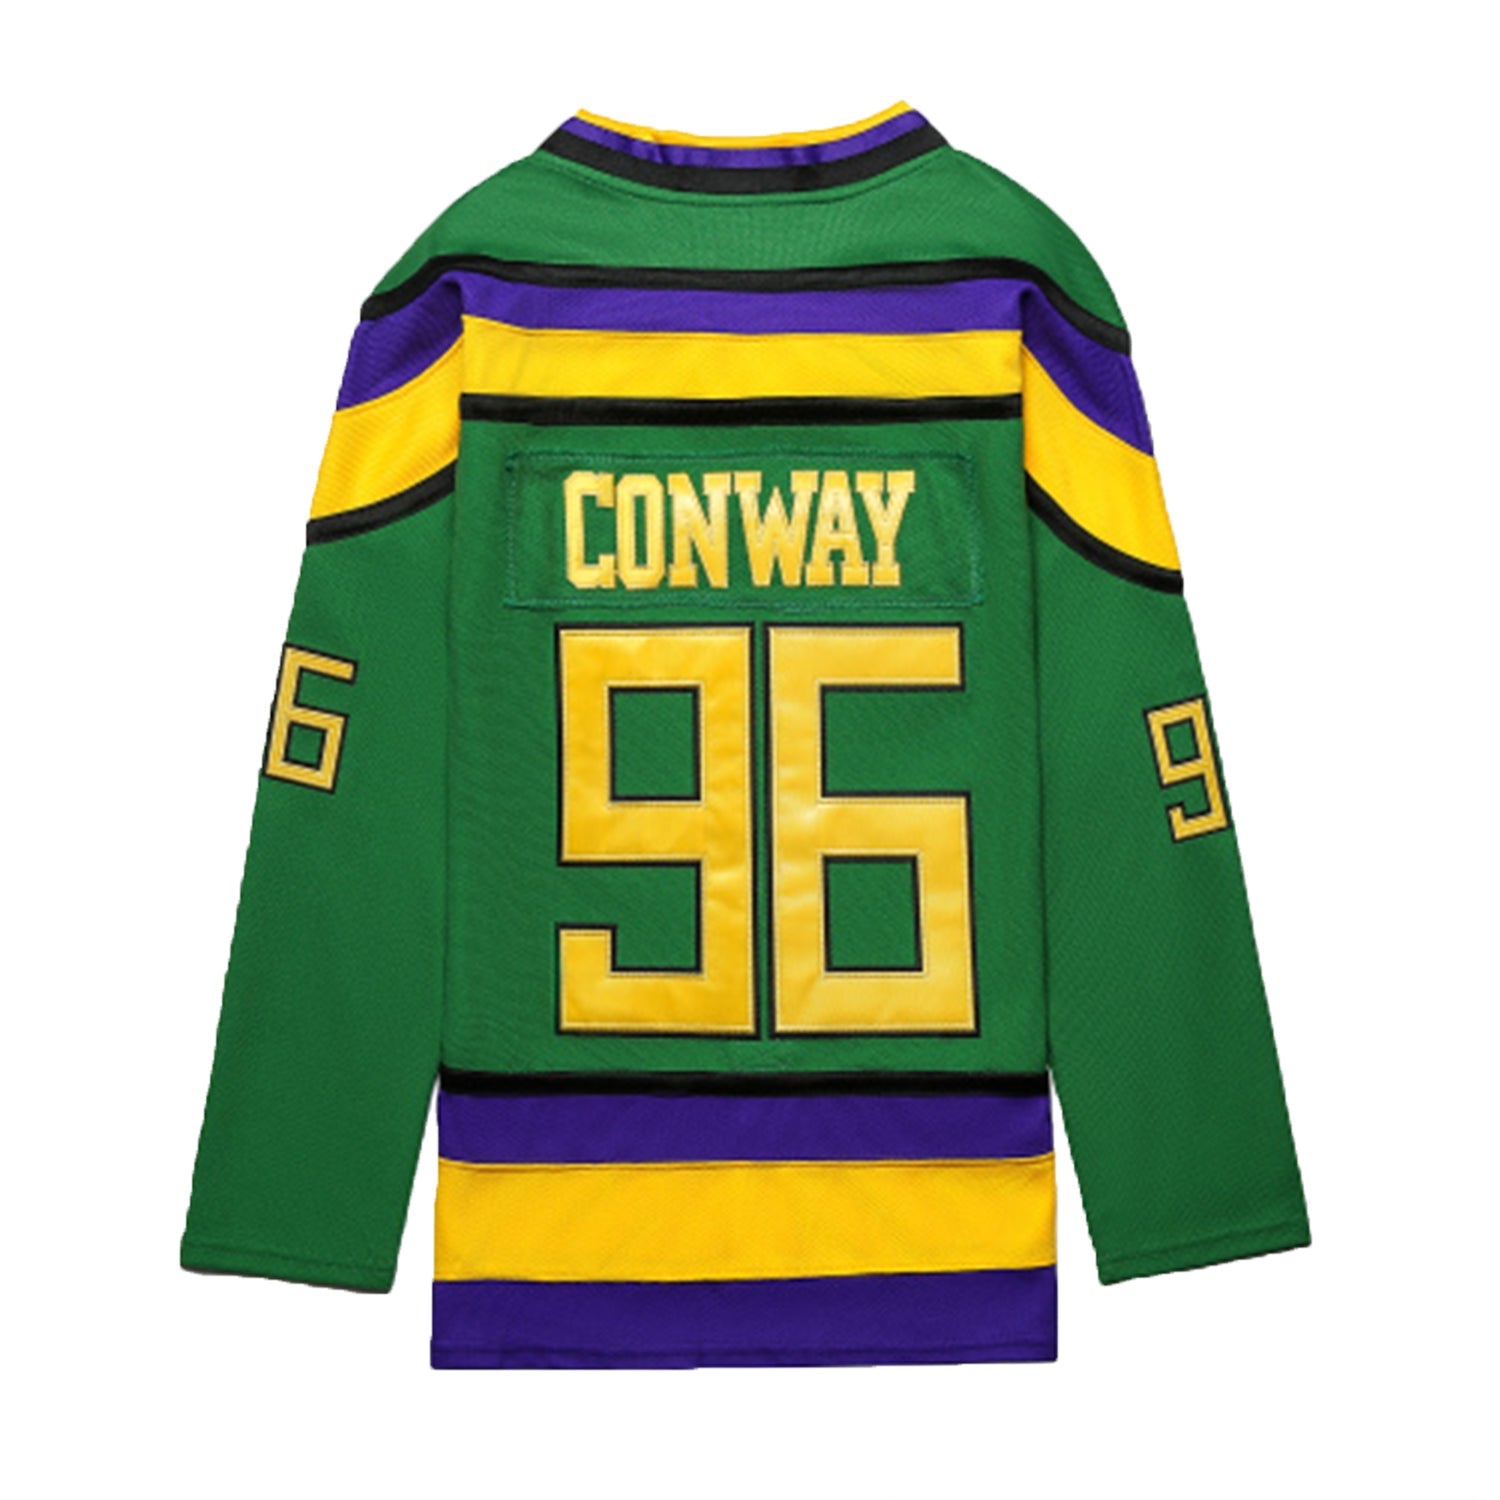 For those confused with the original Ducks jersey thing : r